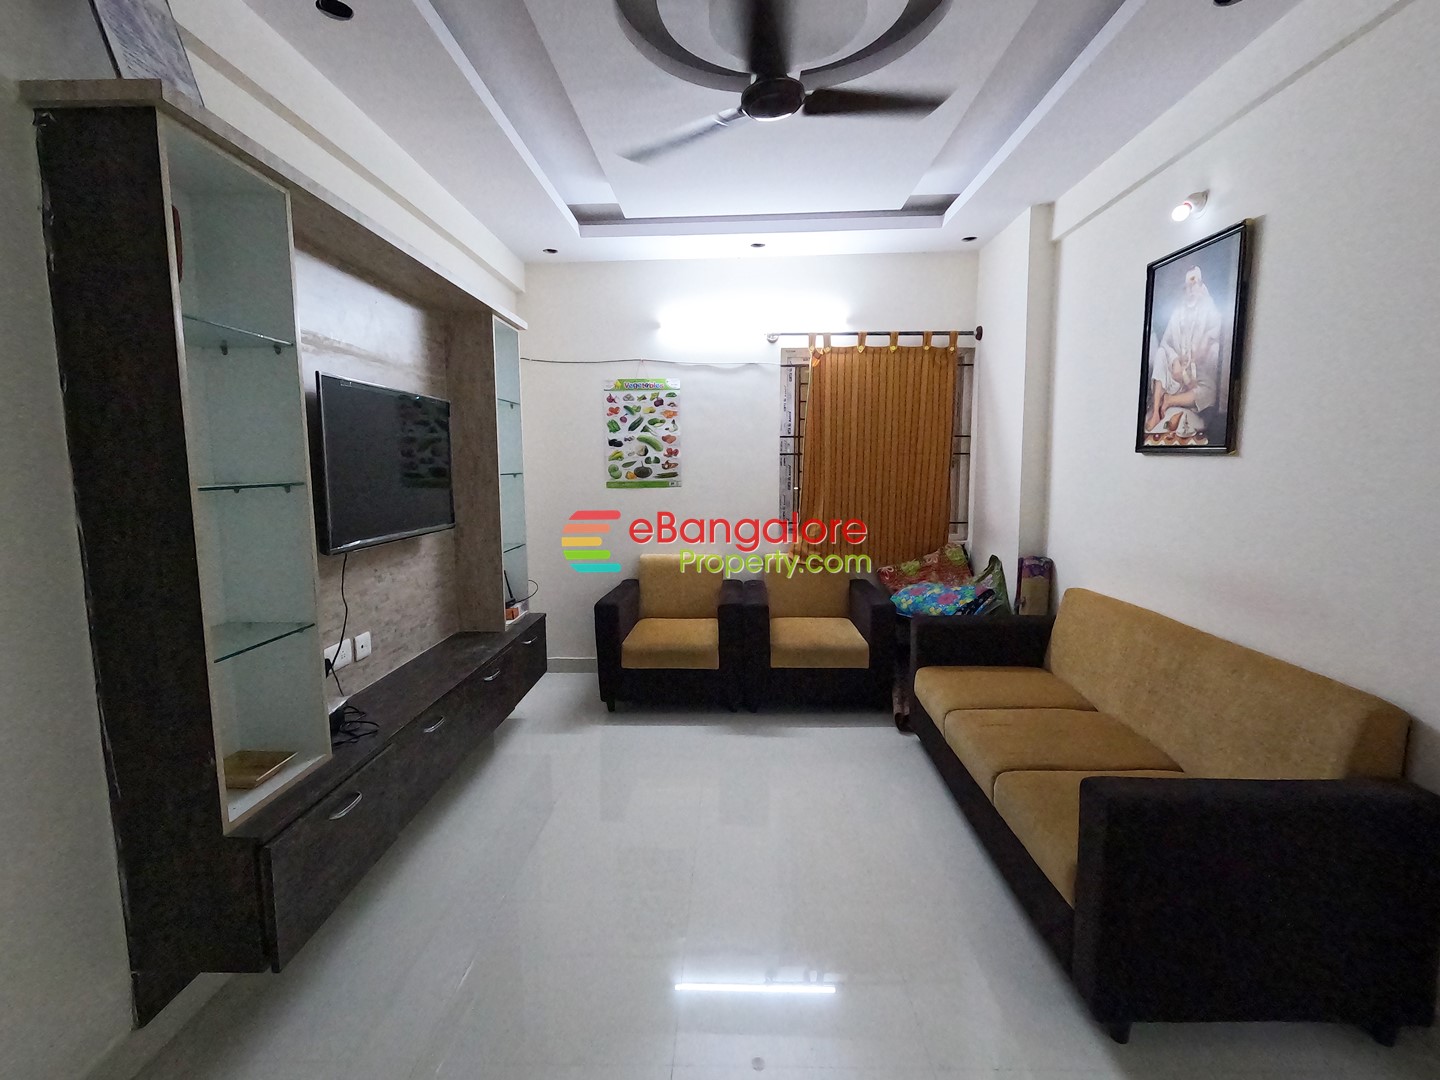 Electronic City Phase 1 – 2BHK Semifurnished Flat For Sale with OC/CC & Amenities – VR Meadows